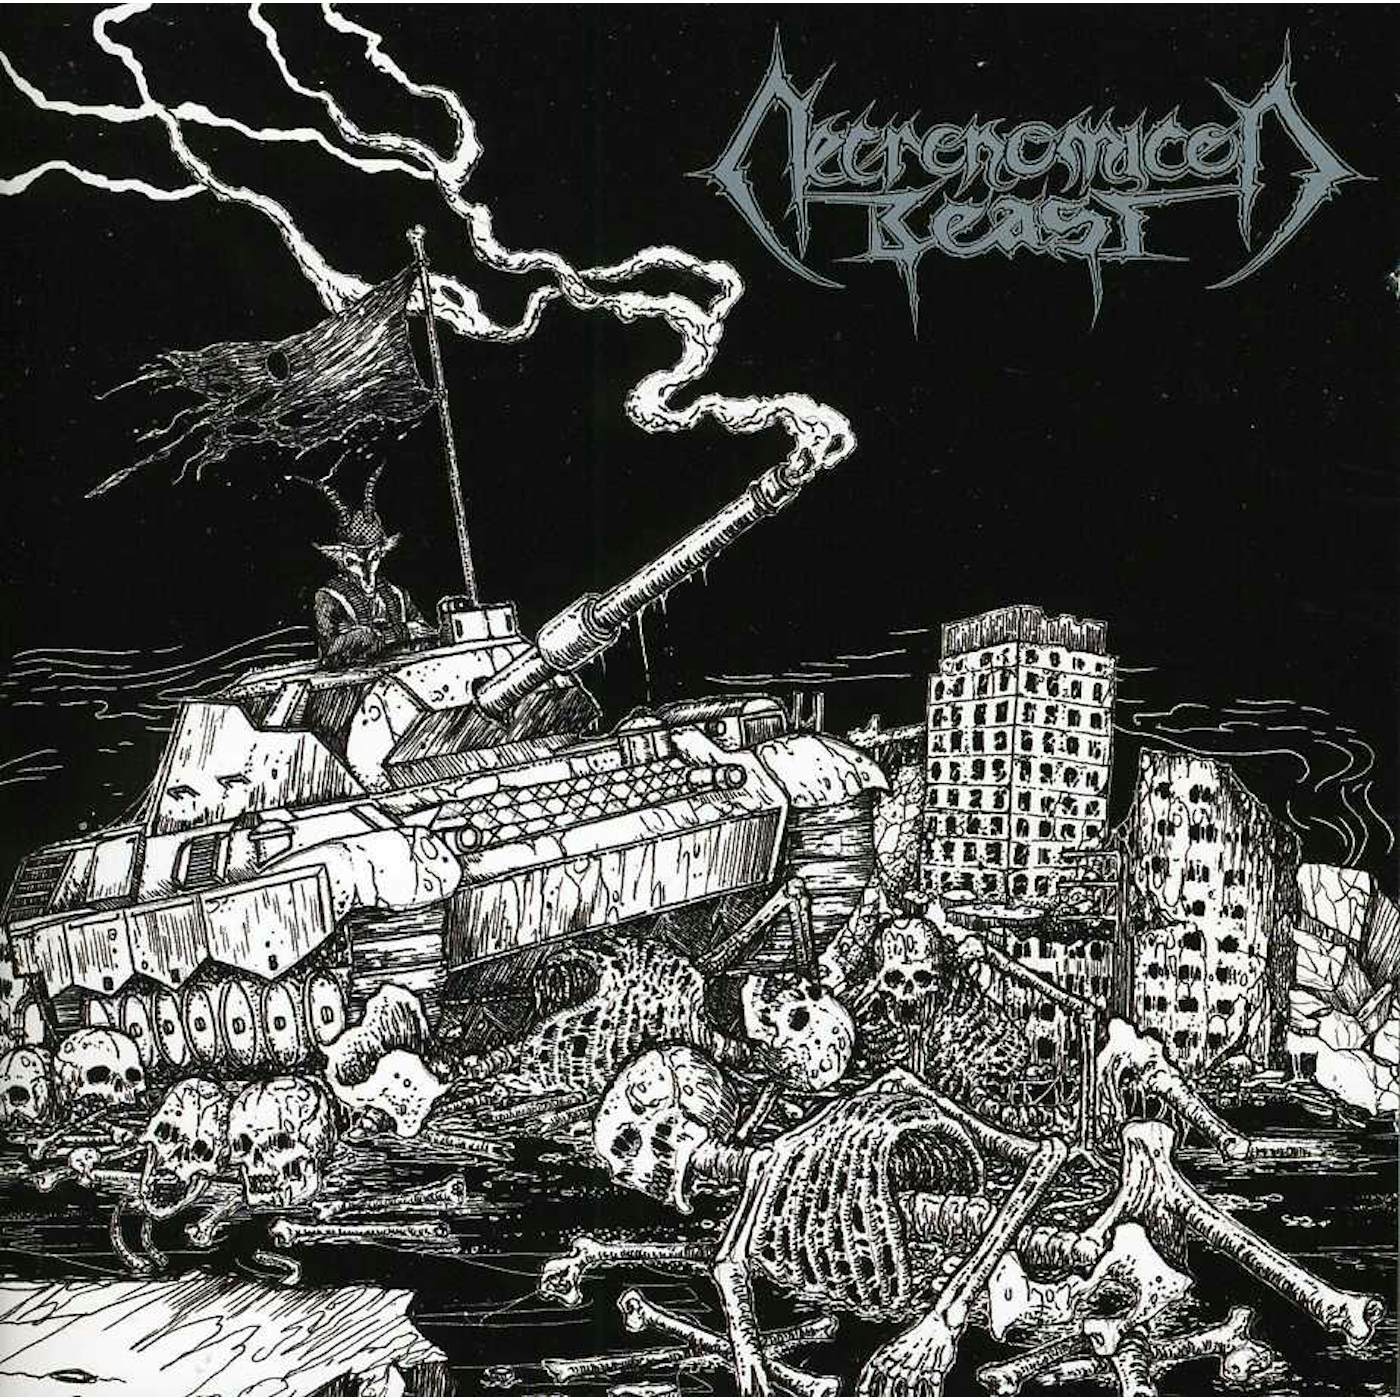 Necronomicon Beast SOWERS OF DISCORD CD